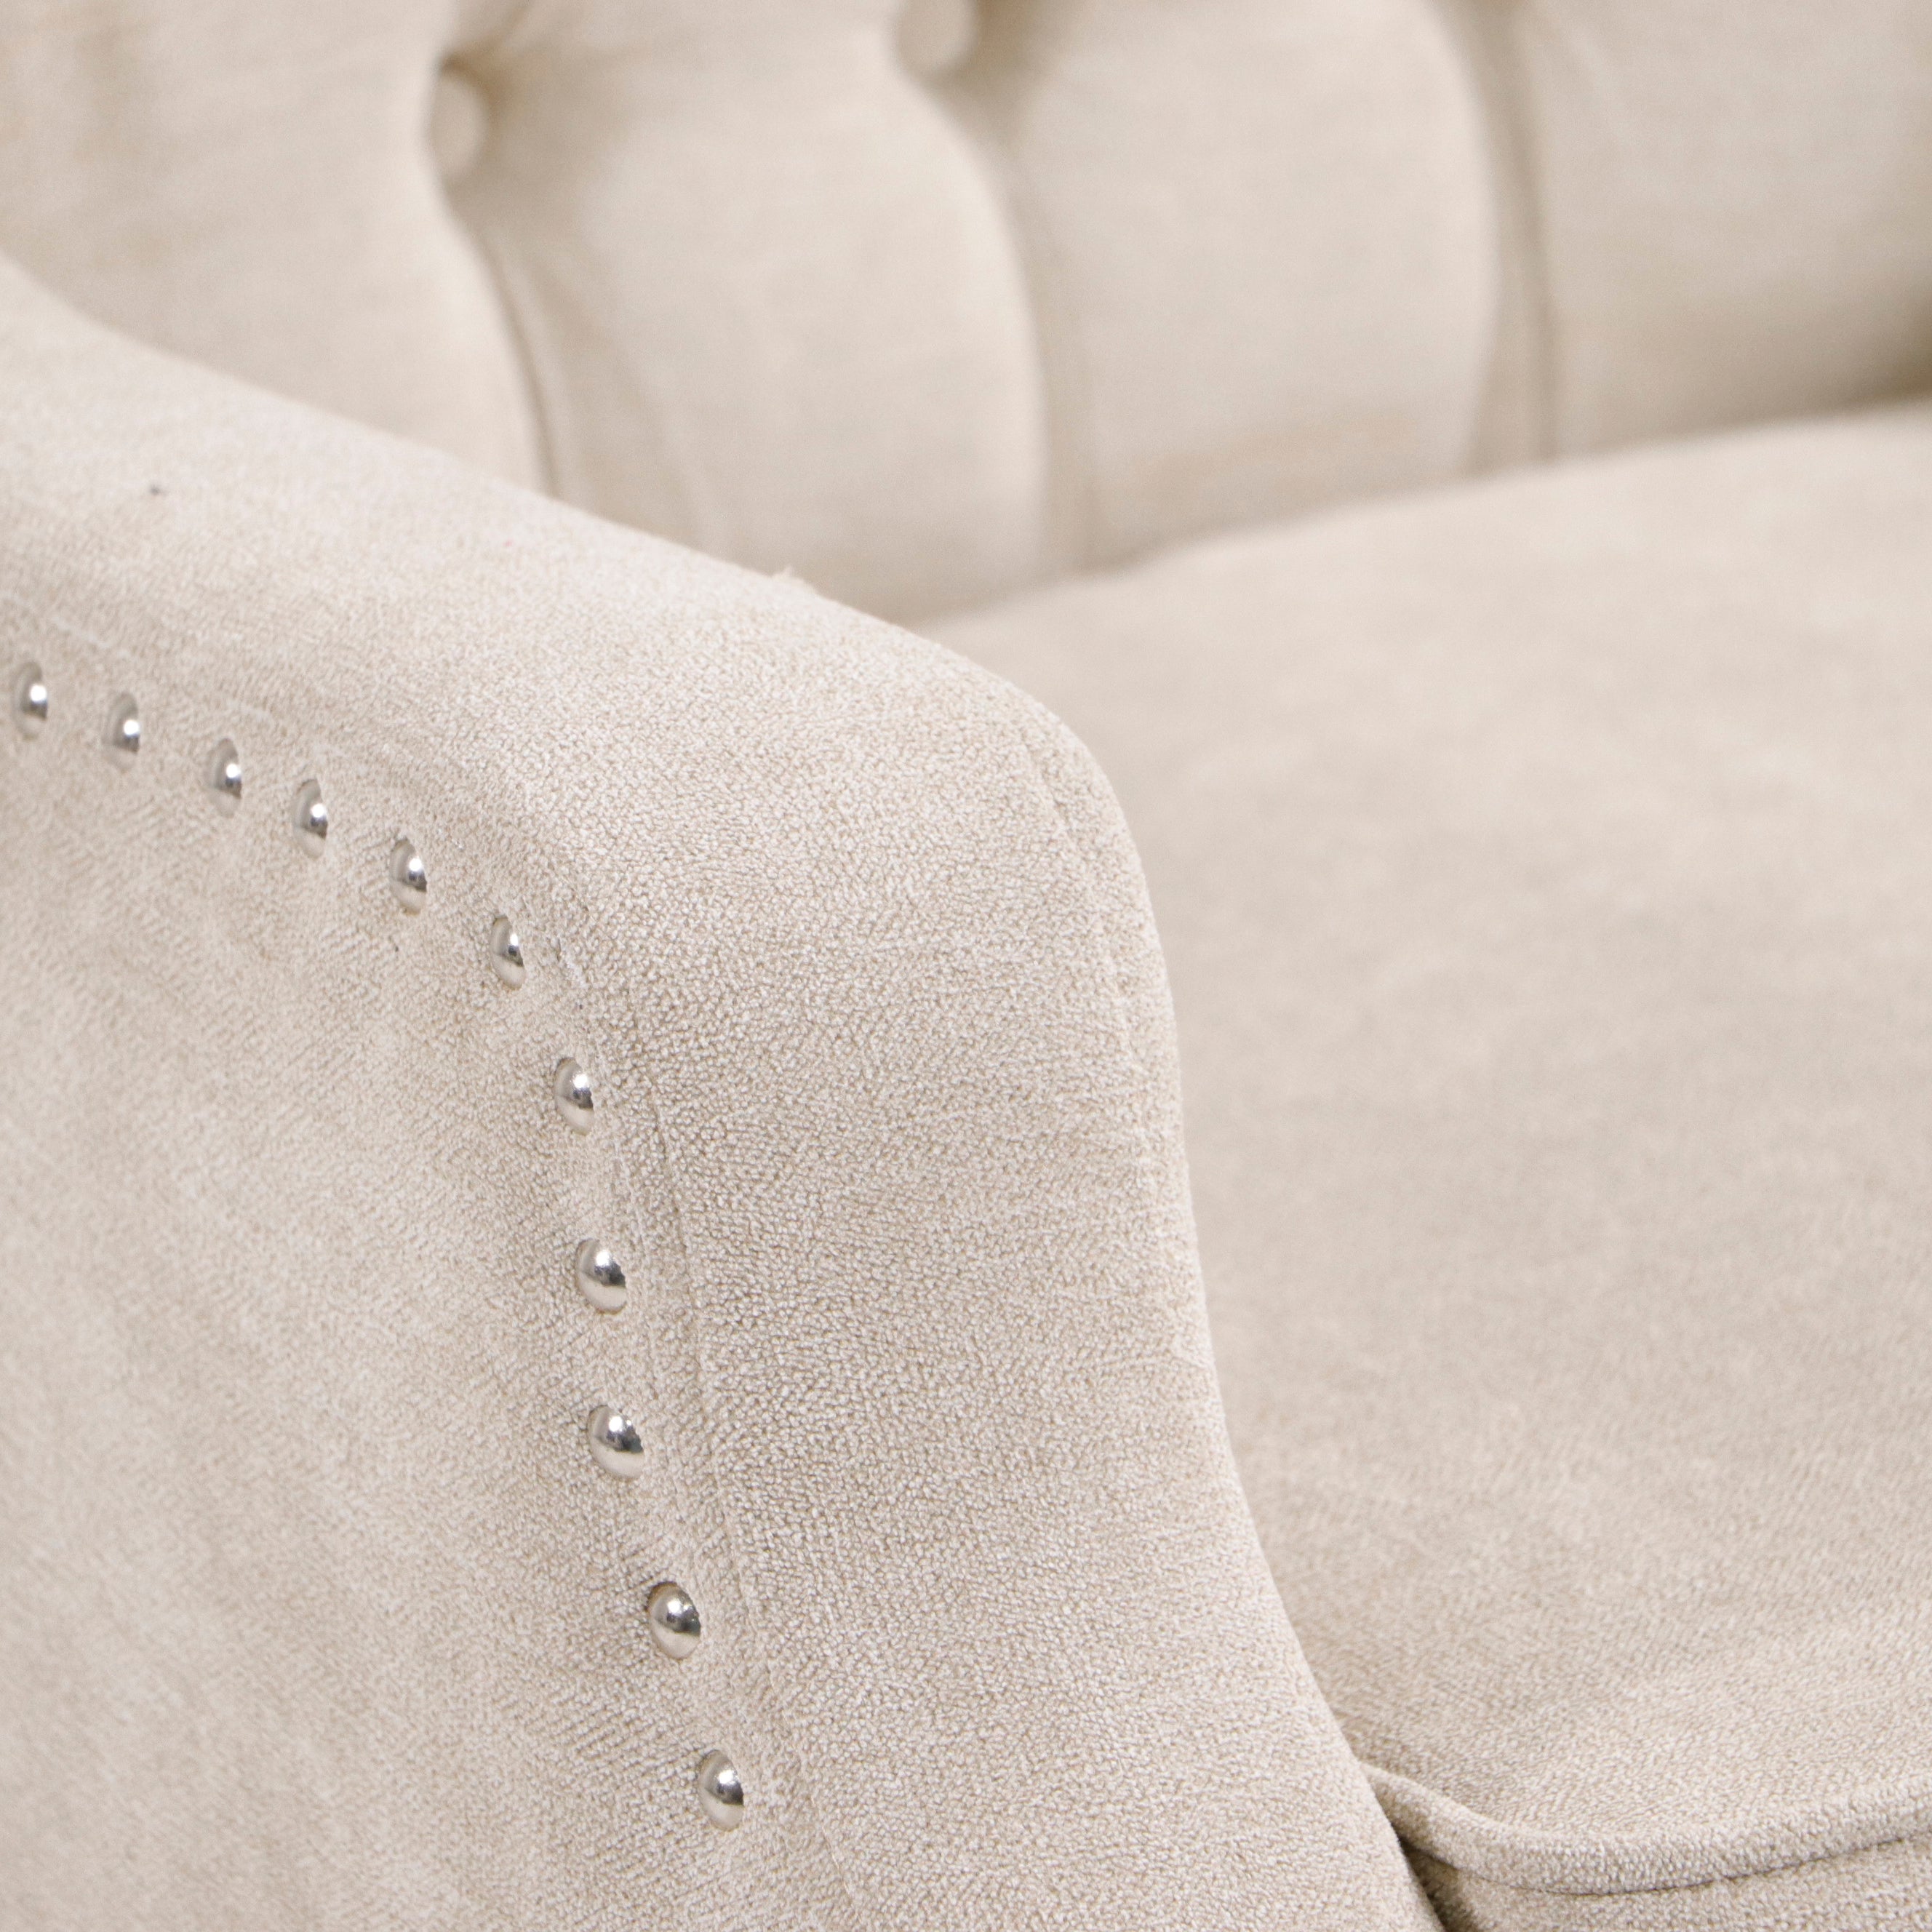 NOBLEMOOD Accent Chair with Vintage Brass Studs and Wood Legs, Button Tufted Upholstered Armchair, Beige